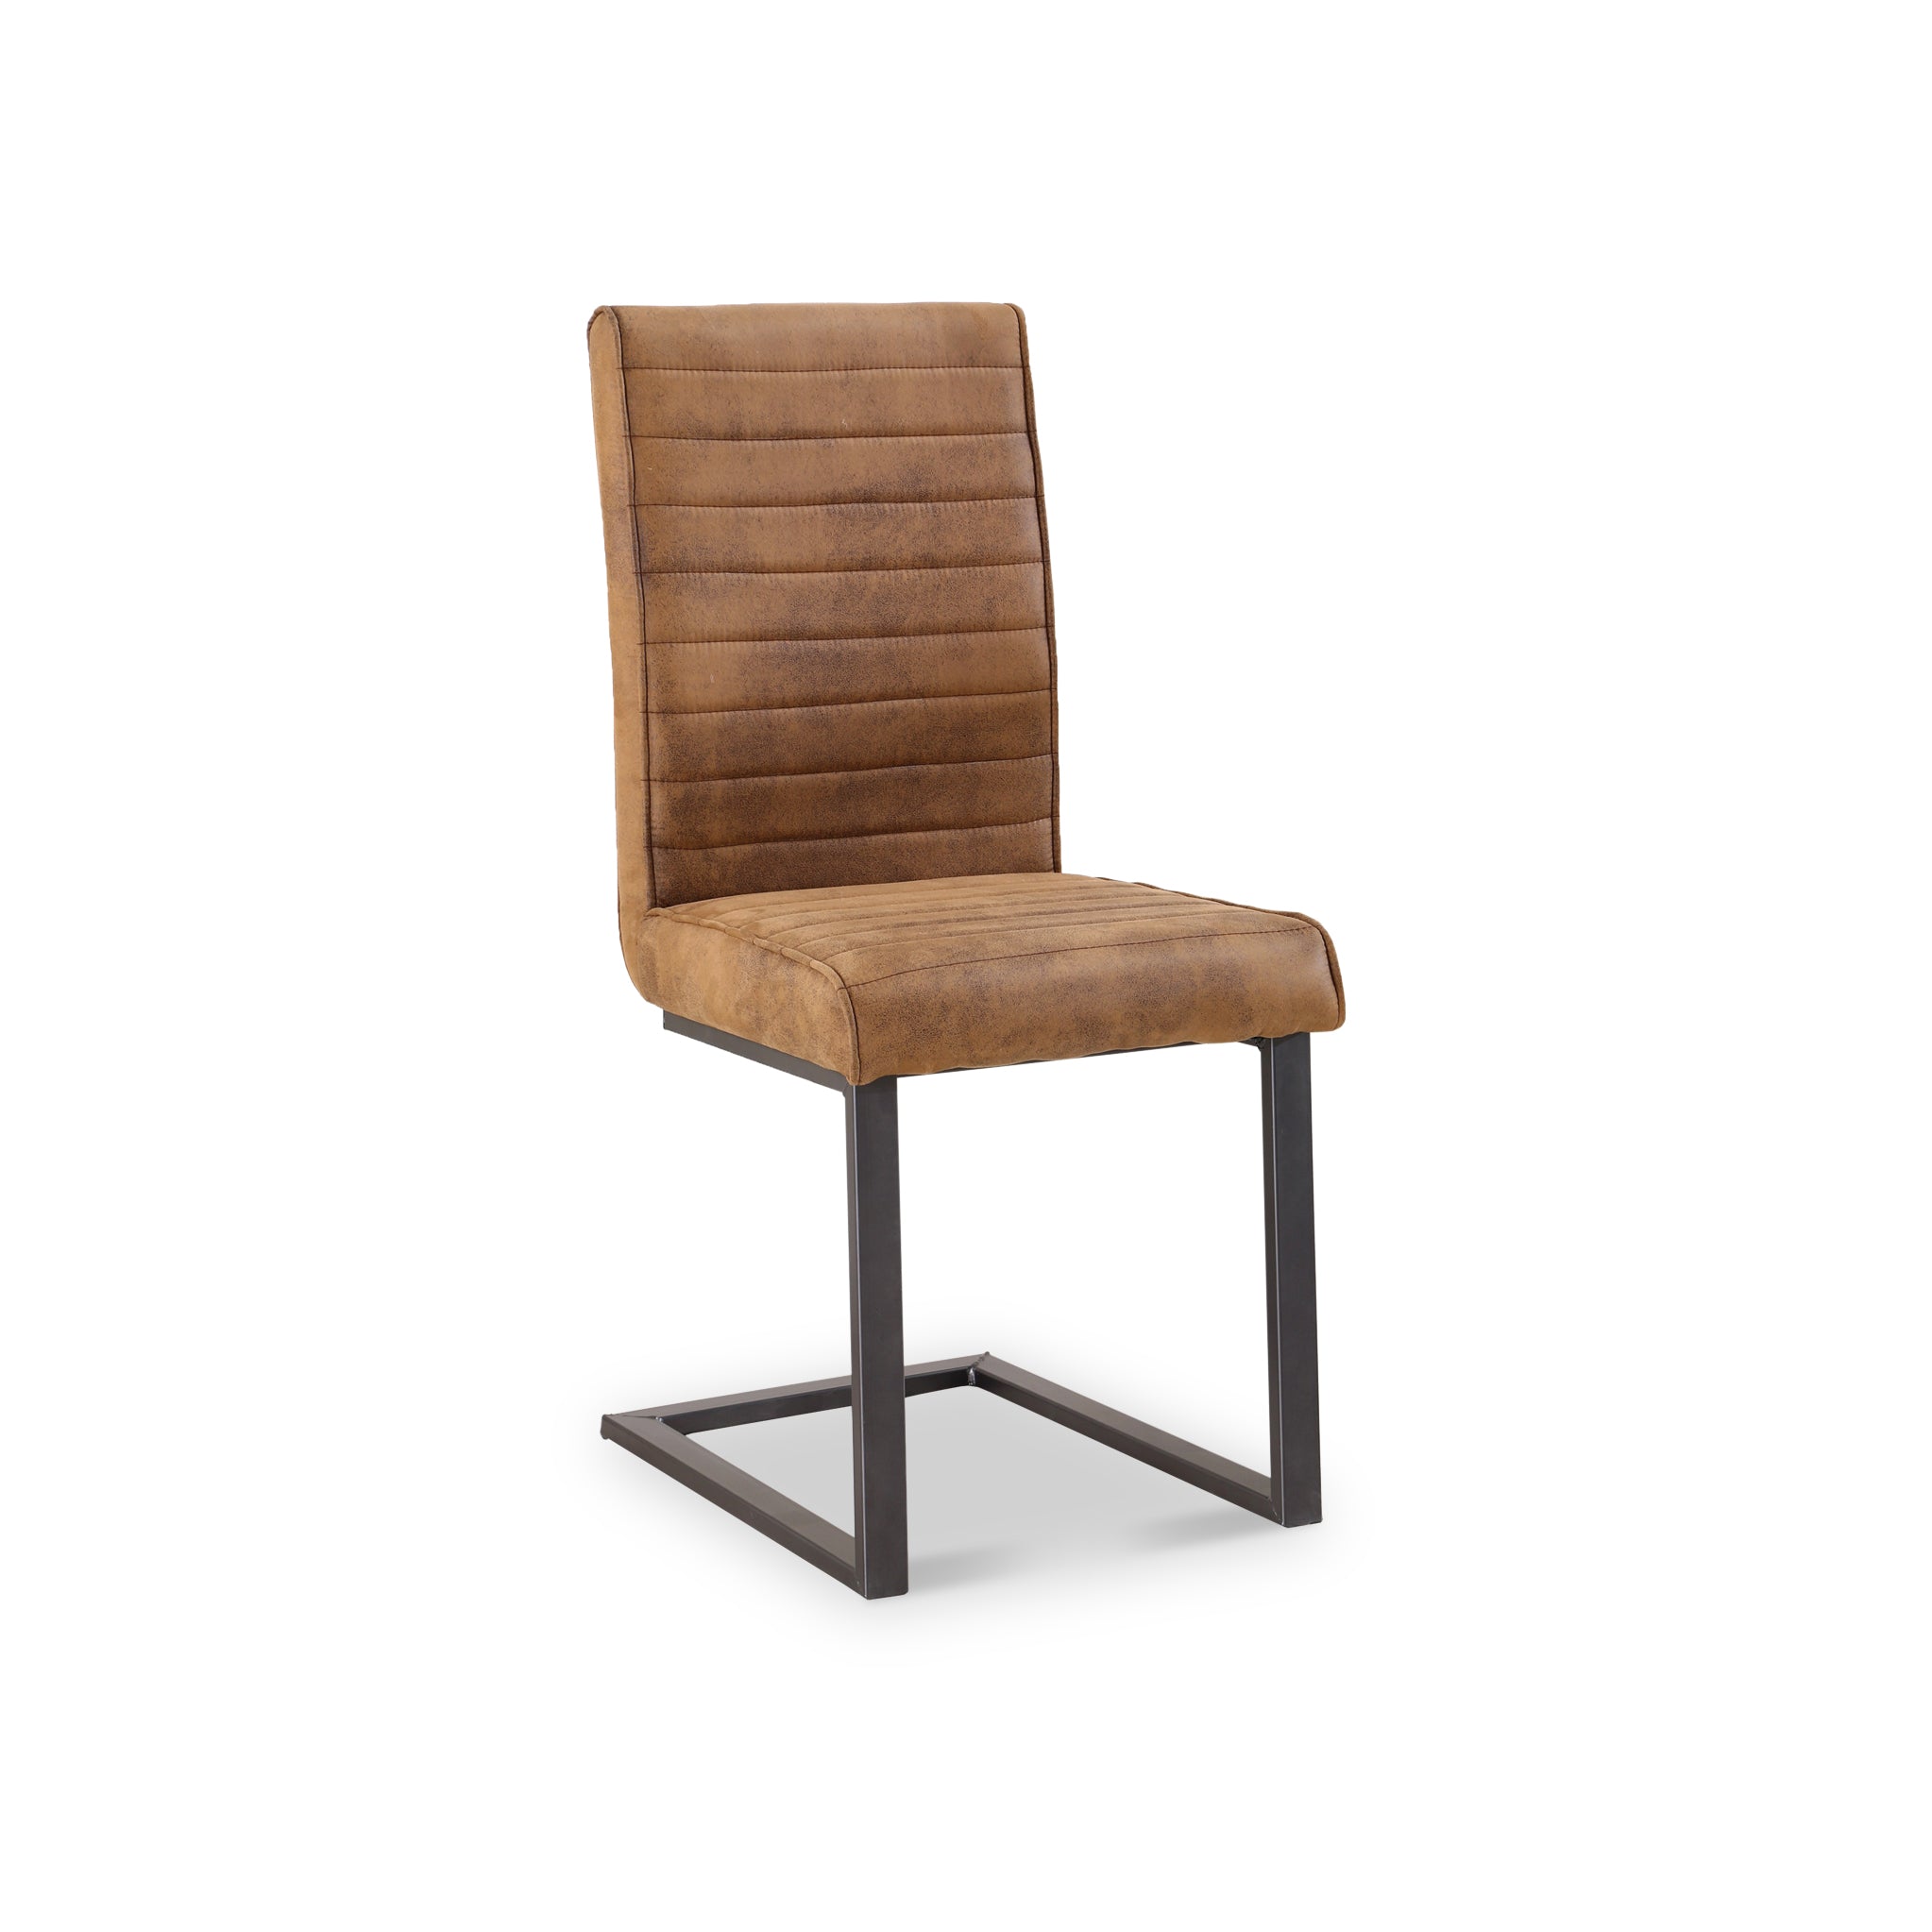 Robyn Tan Brown Pu Faux Leather Dining Chair With Black Legs